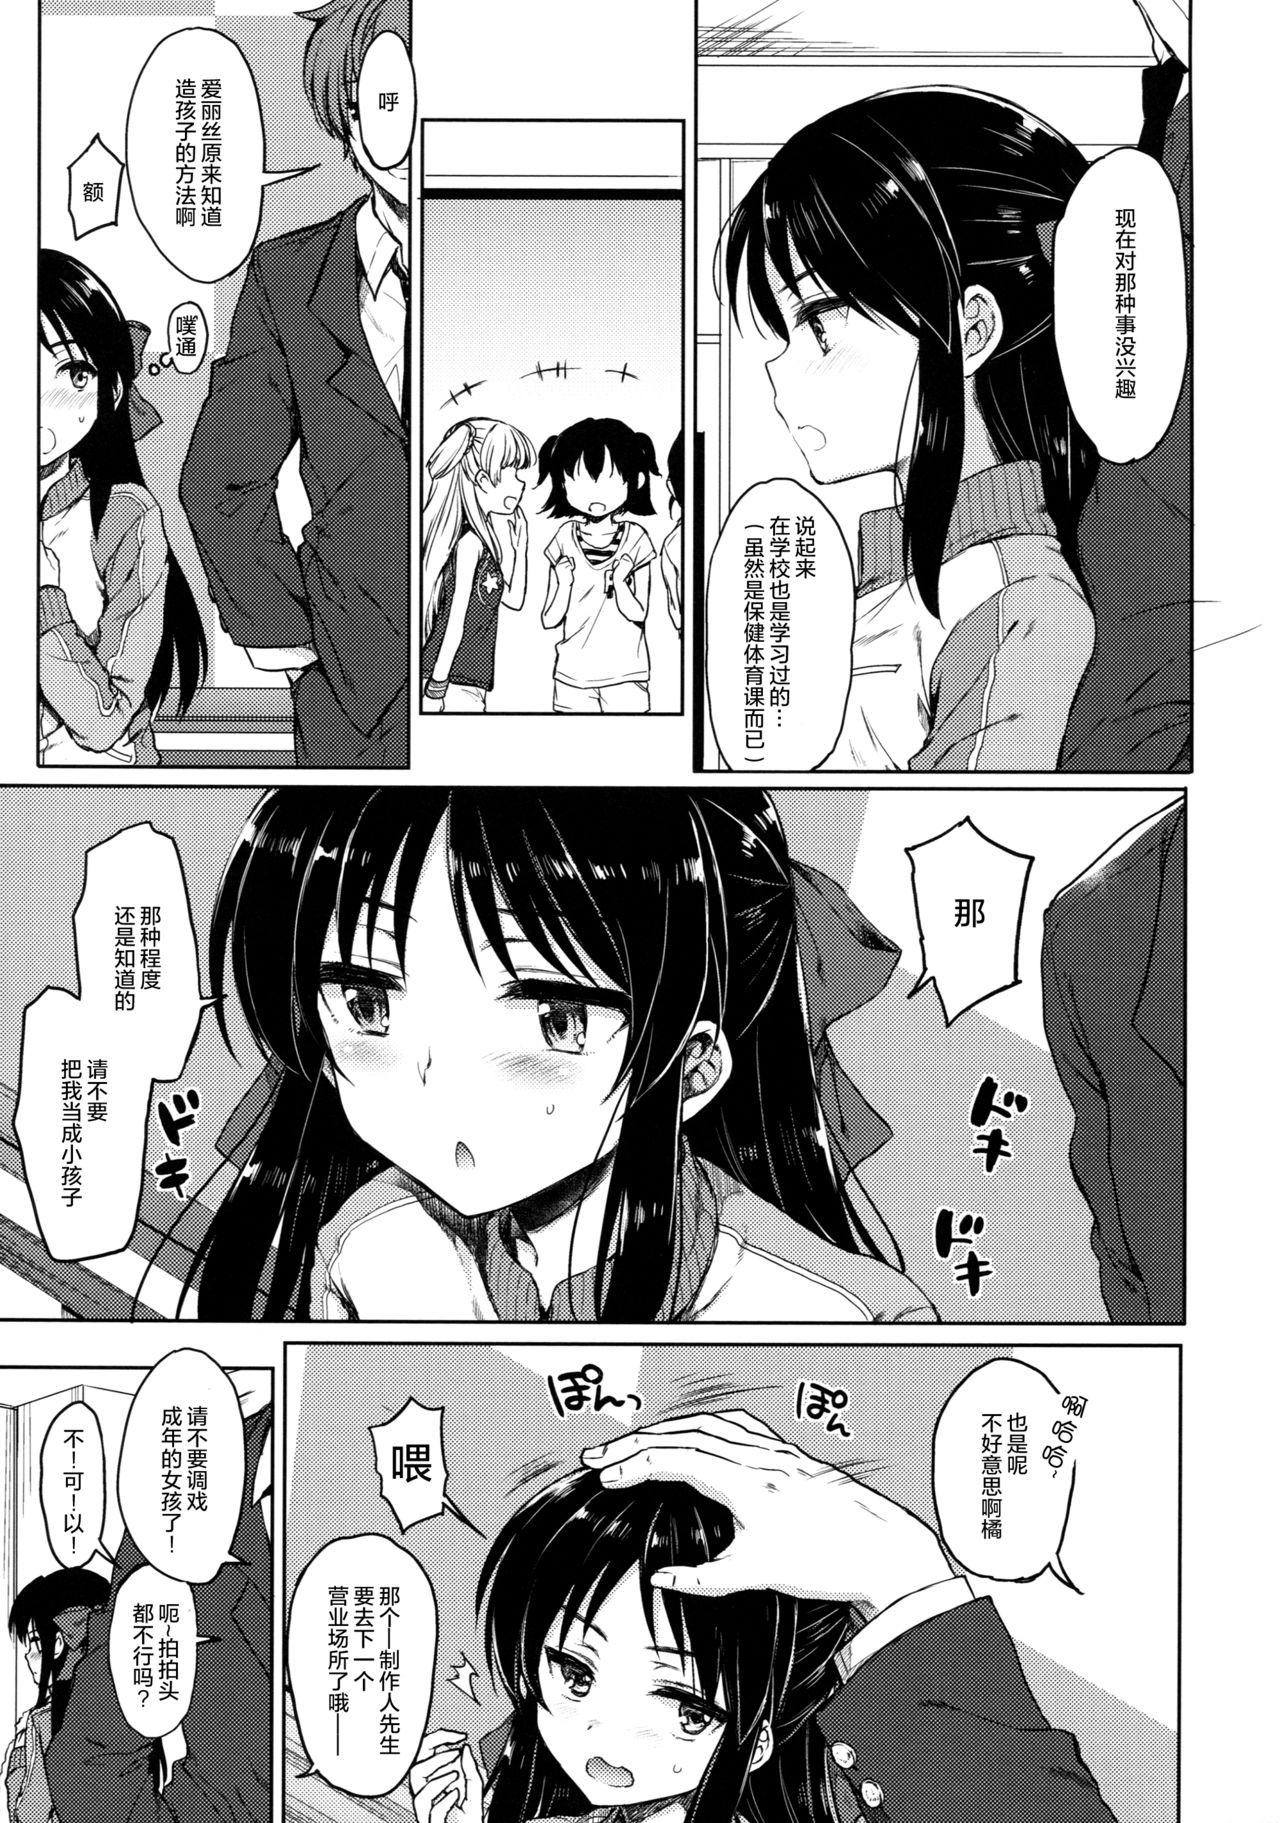 Best Blowjobs Ever Hajimete no Alice - The idolmaster Squirting - Page 9